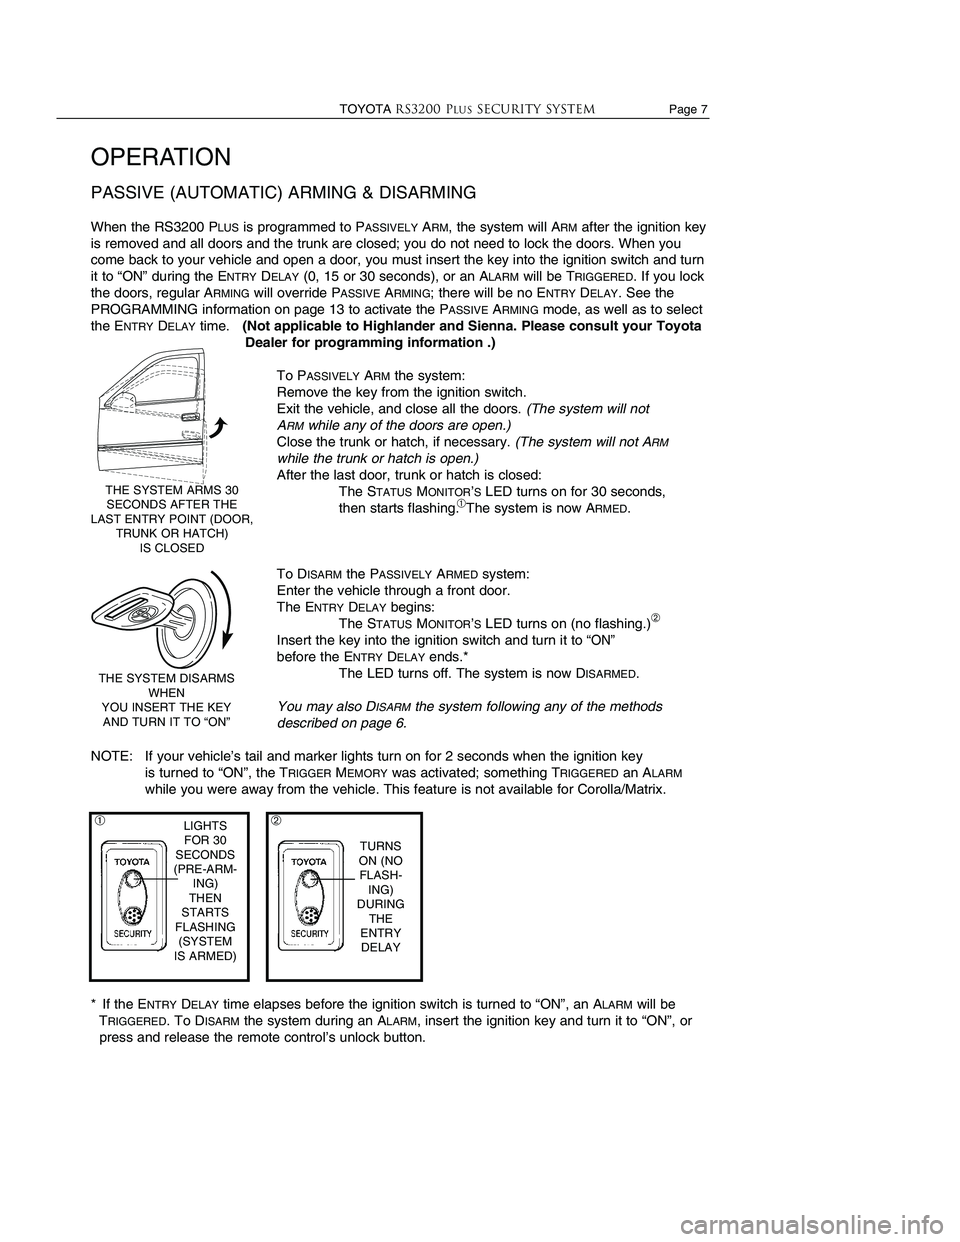 TOYOTA SOLARA 2003  Accessories, Audio & Navigation (in English) Page 6                    TOYOTARS3200 PLUSSecurity system
OPERATION
DISARMING THE RS3200 PLUS(except PASSIVE DISARMING)
The system may be DISARMEDin several ways. Do one of the following: 
Unlock the